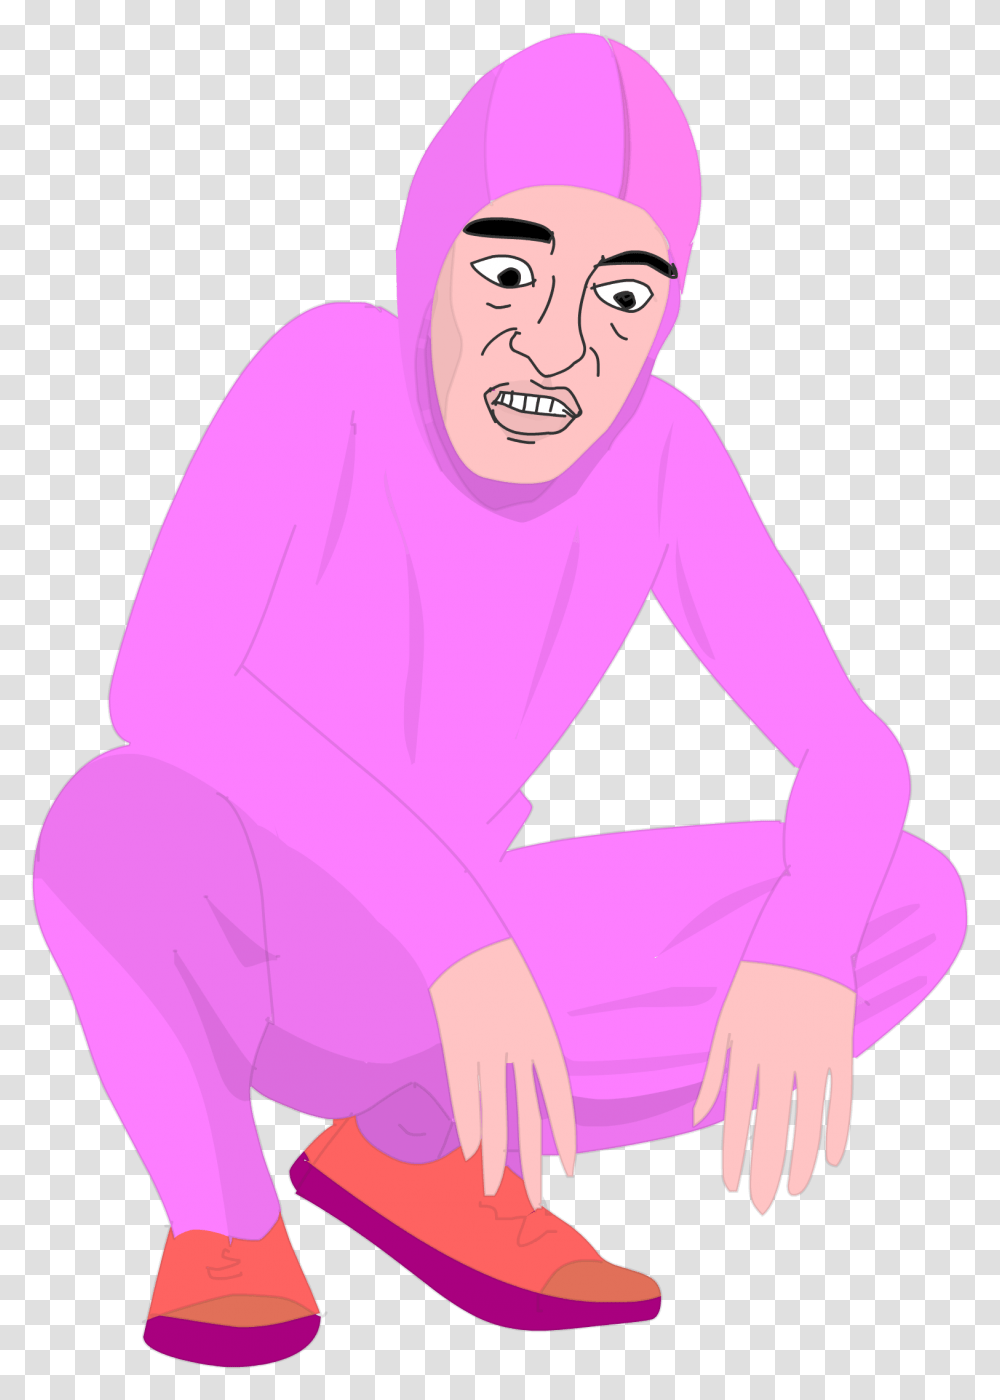 Filthy Franks Pinkguy Vectors And Wallpapers, Sitting, Person, Sleeve Transparent Png